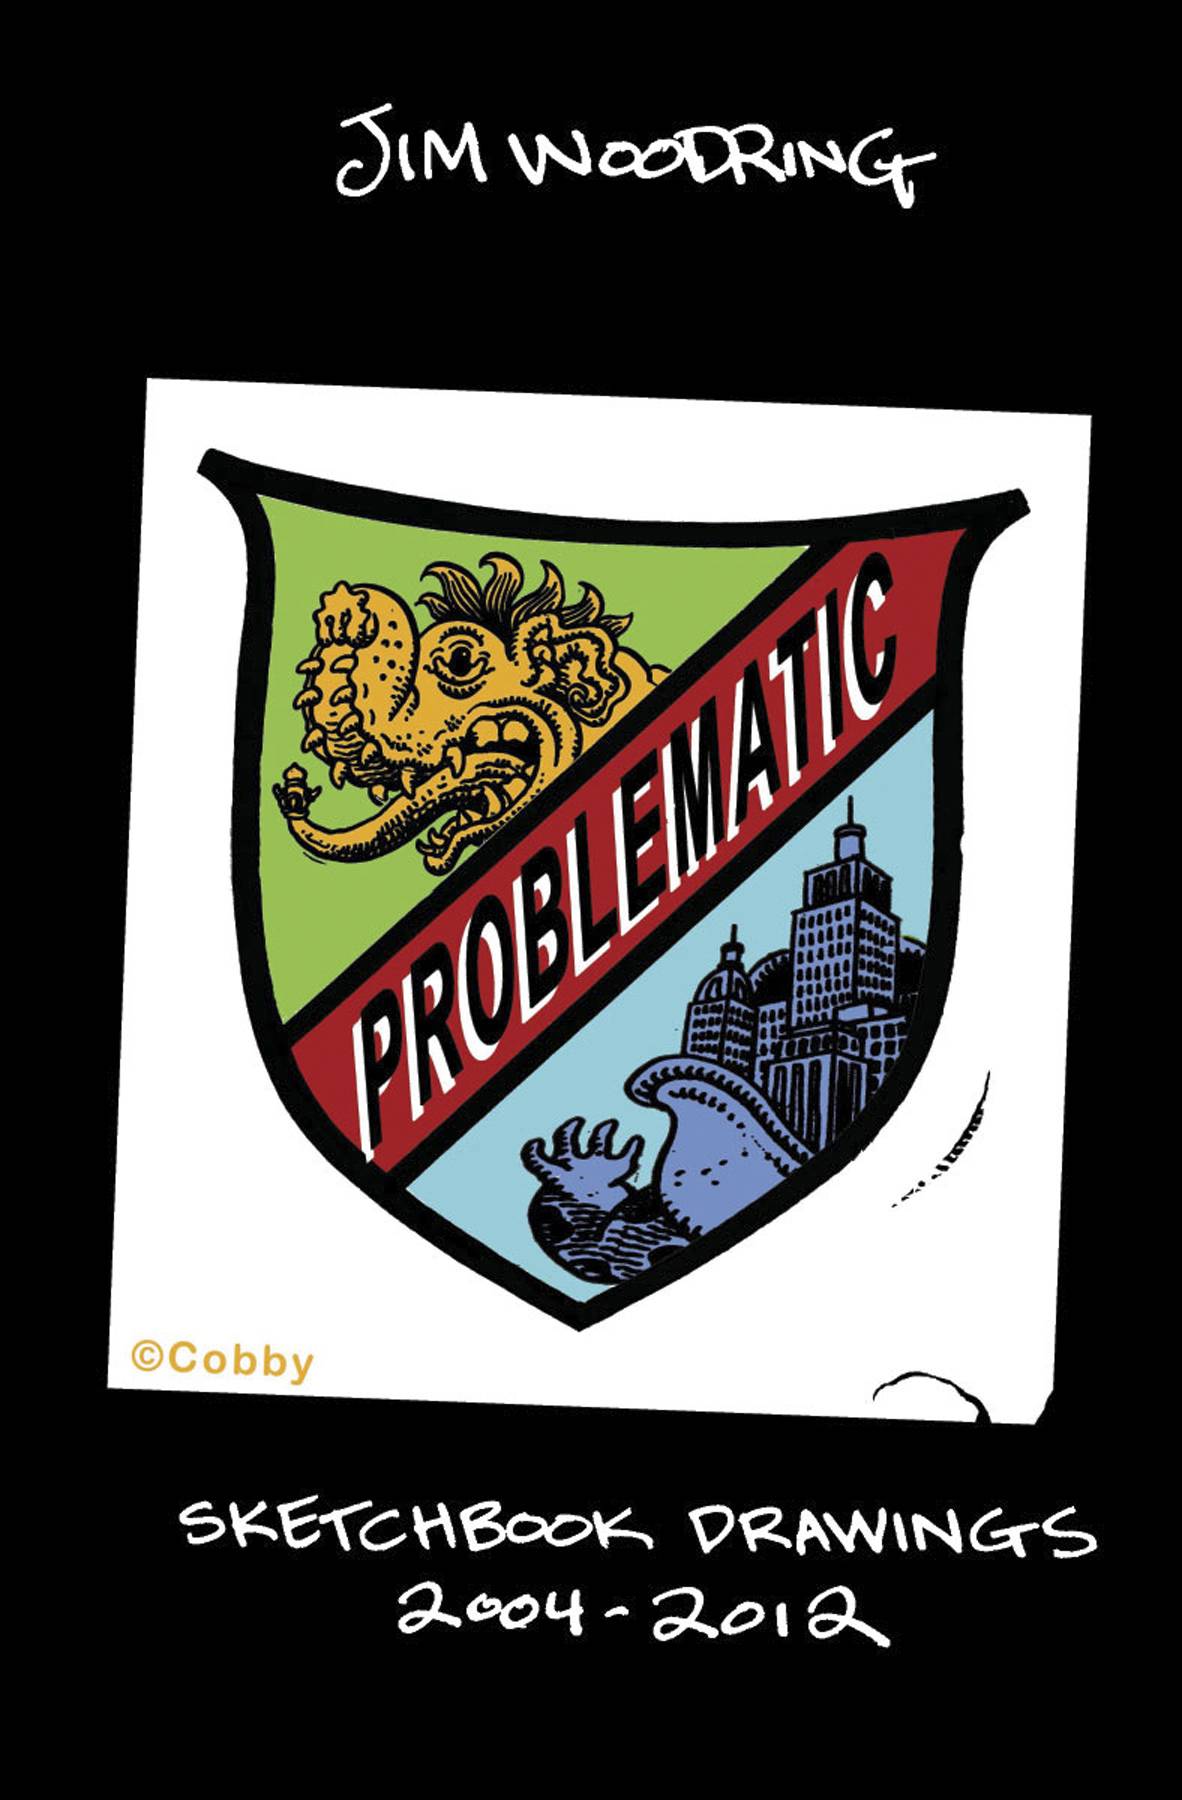 Problematic: The Woodring Sketchbook